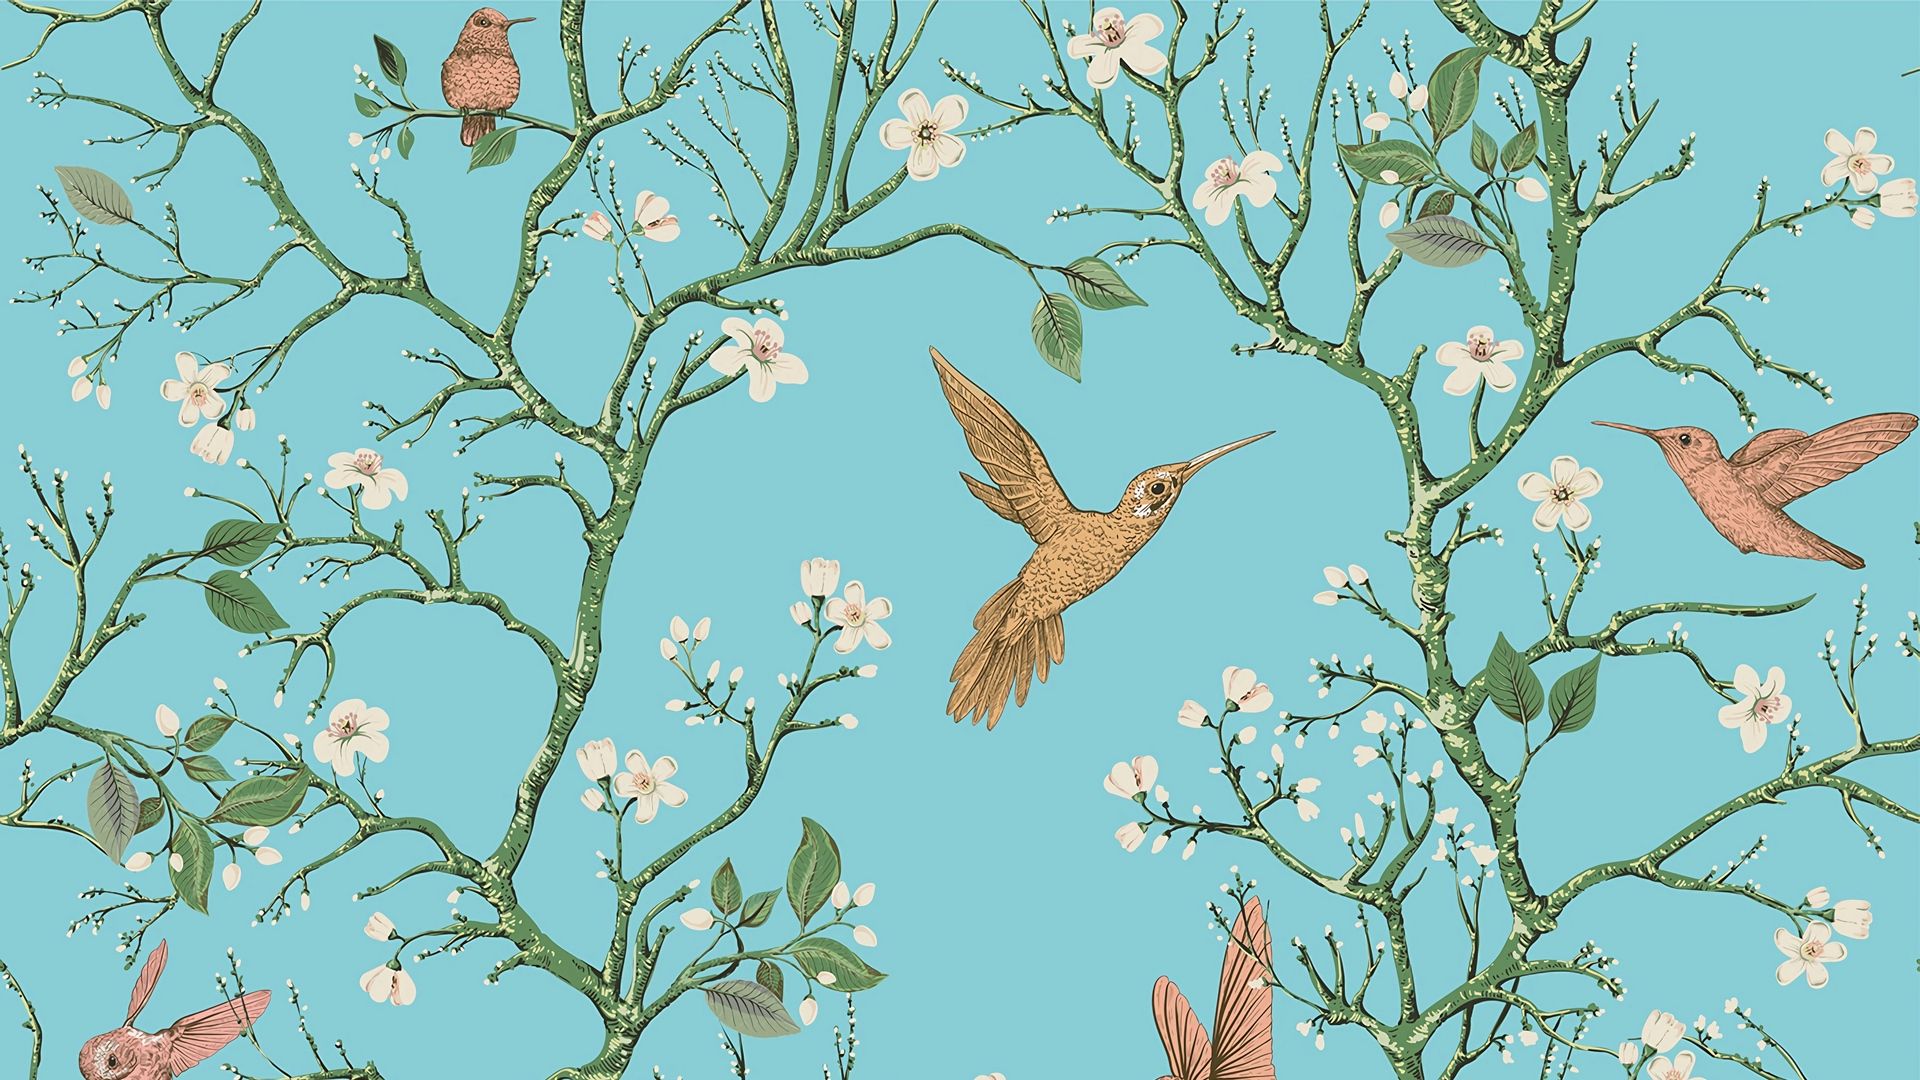 Download wallpaper 1920x1080 birds, branches, flowers, spring